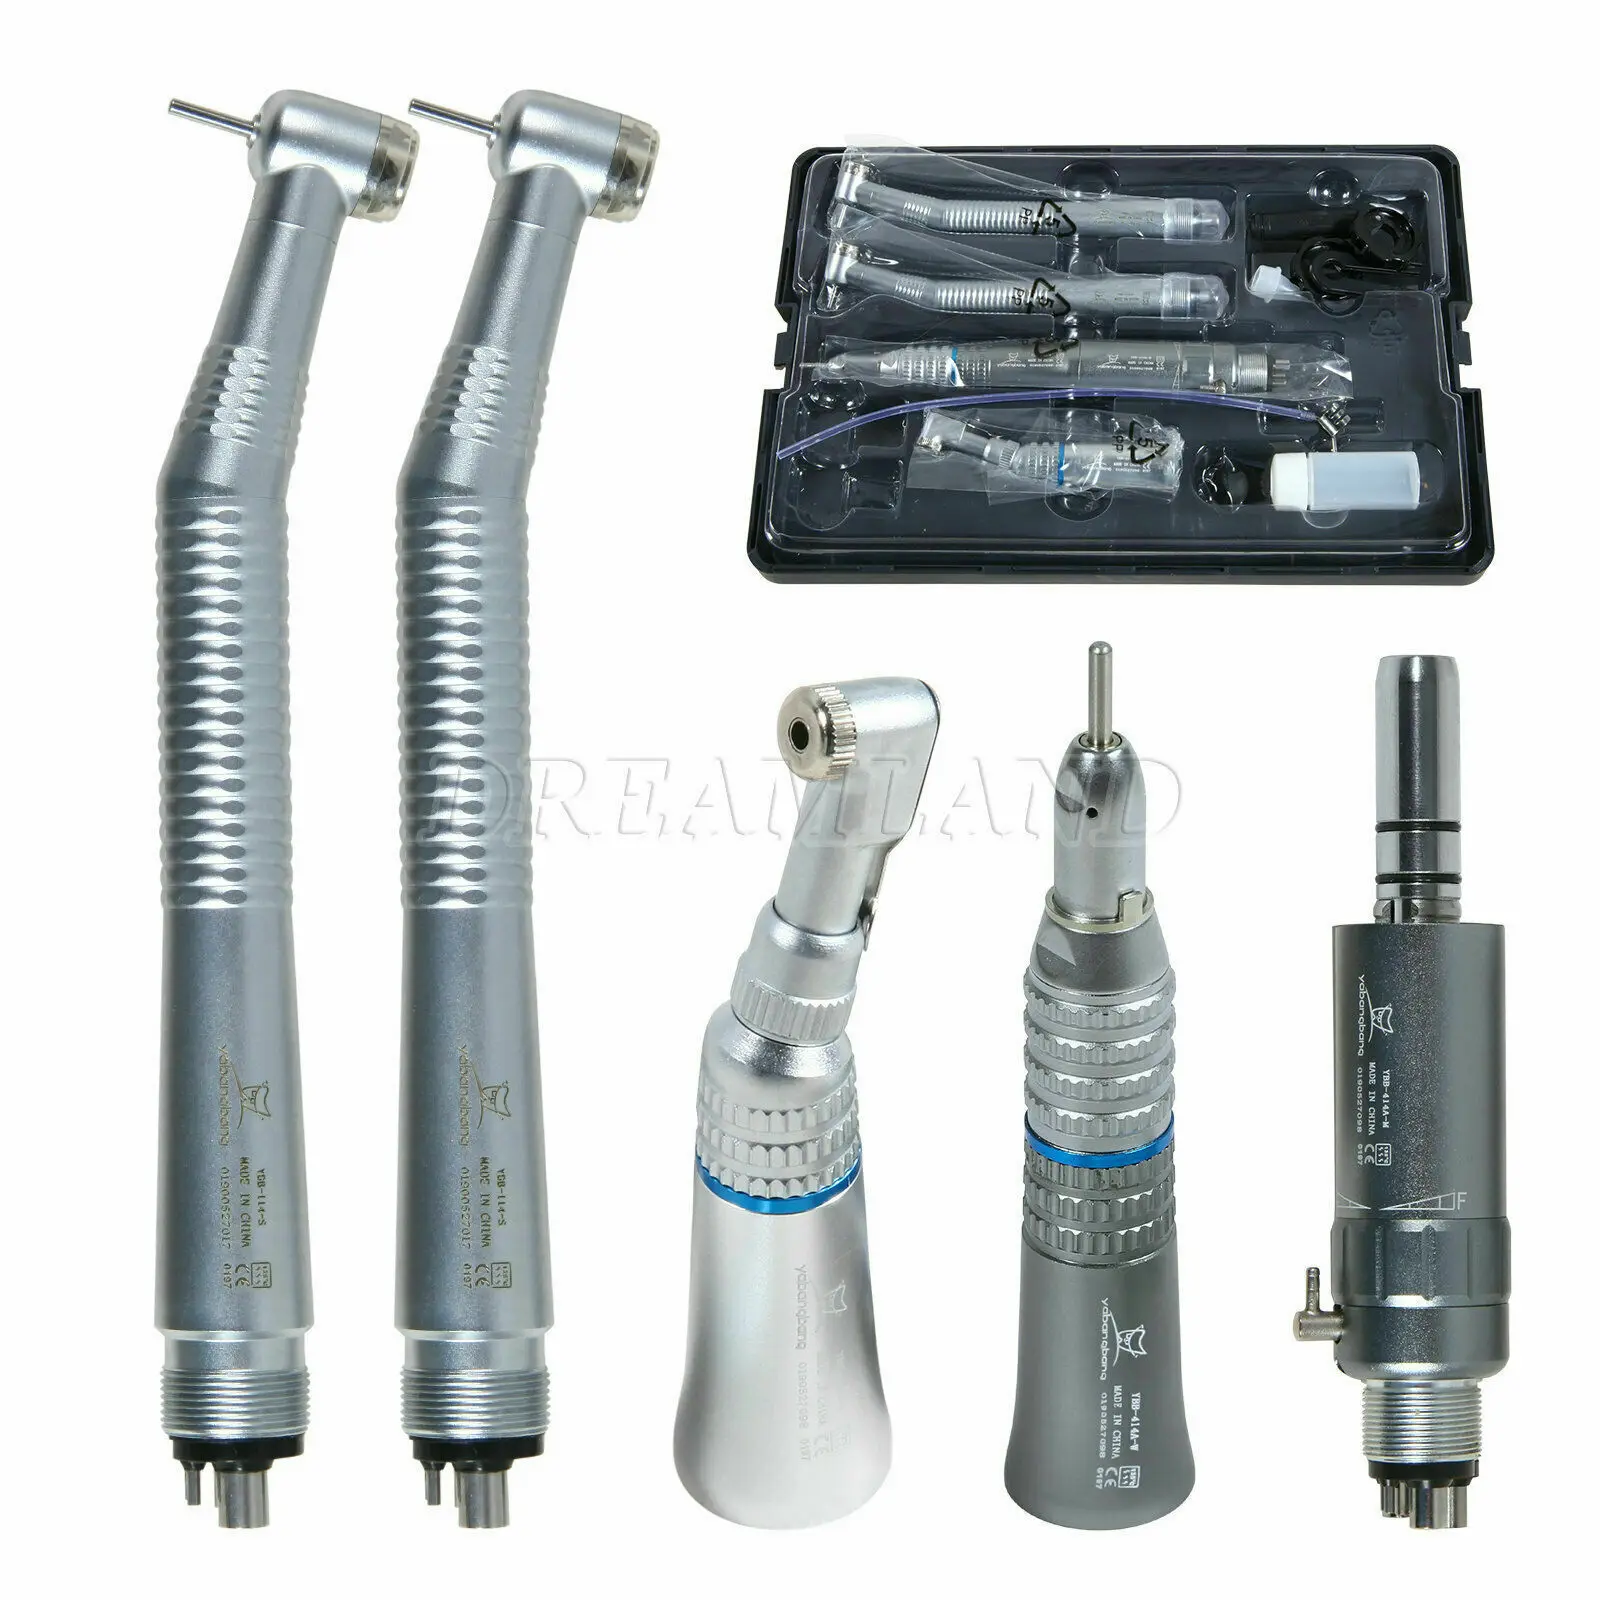 

NSK Pana-Max Style Dental High Fast Slow Low Speed Contra Angle Straight Air Motor Handpiece Kit Turbine 4 Hole